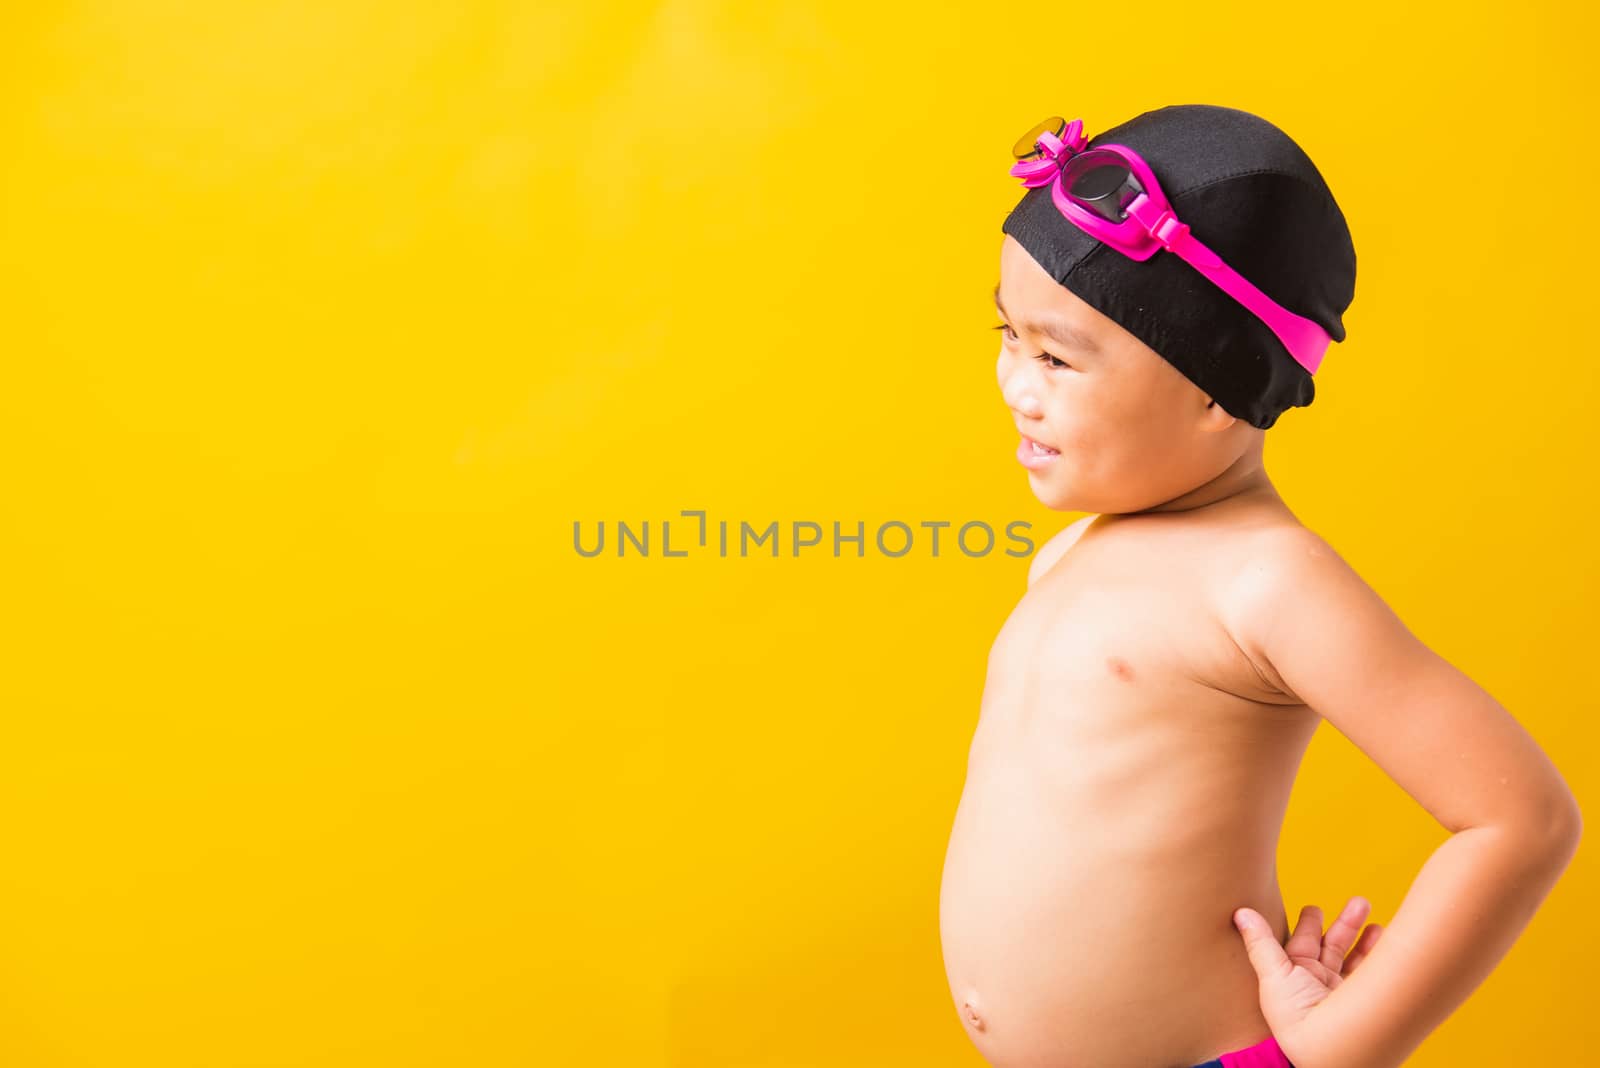 Summer vacation concept, Closeup portrait Asian happy cute little child boy wearing goggles and swimsuit, Kid having fun with in summer vacation looking side, studio shot isolated yellow background